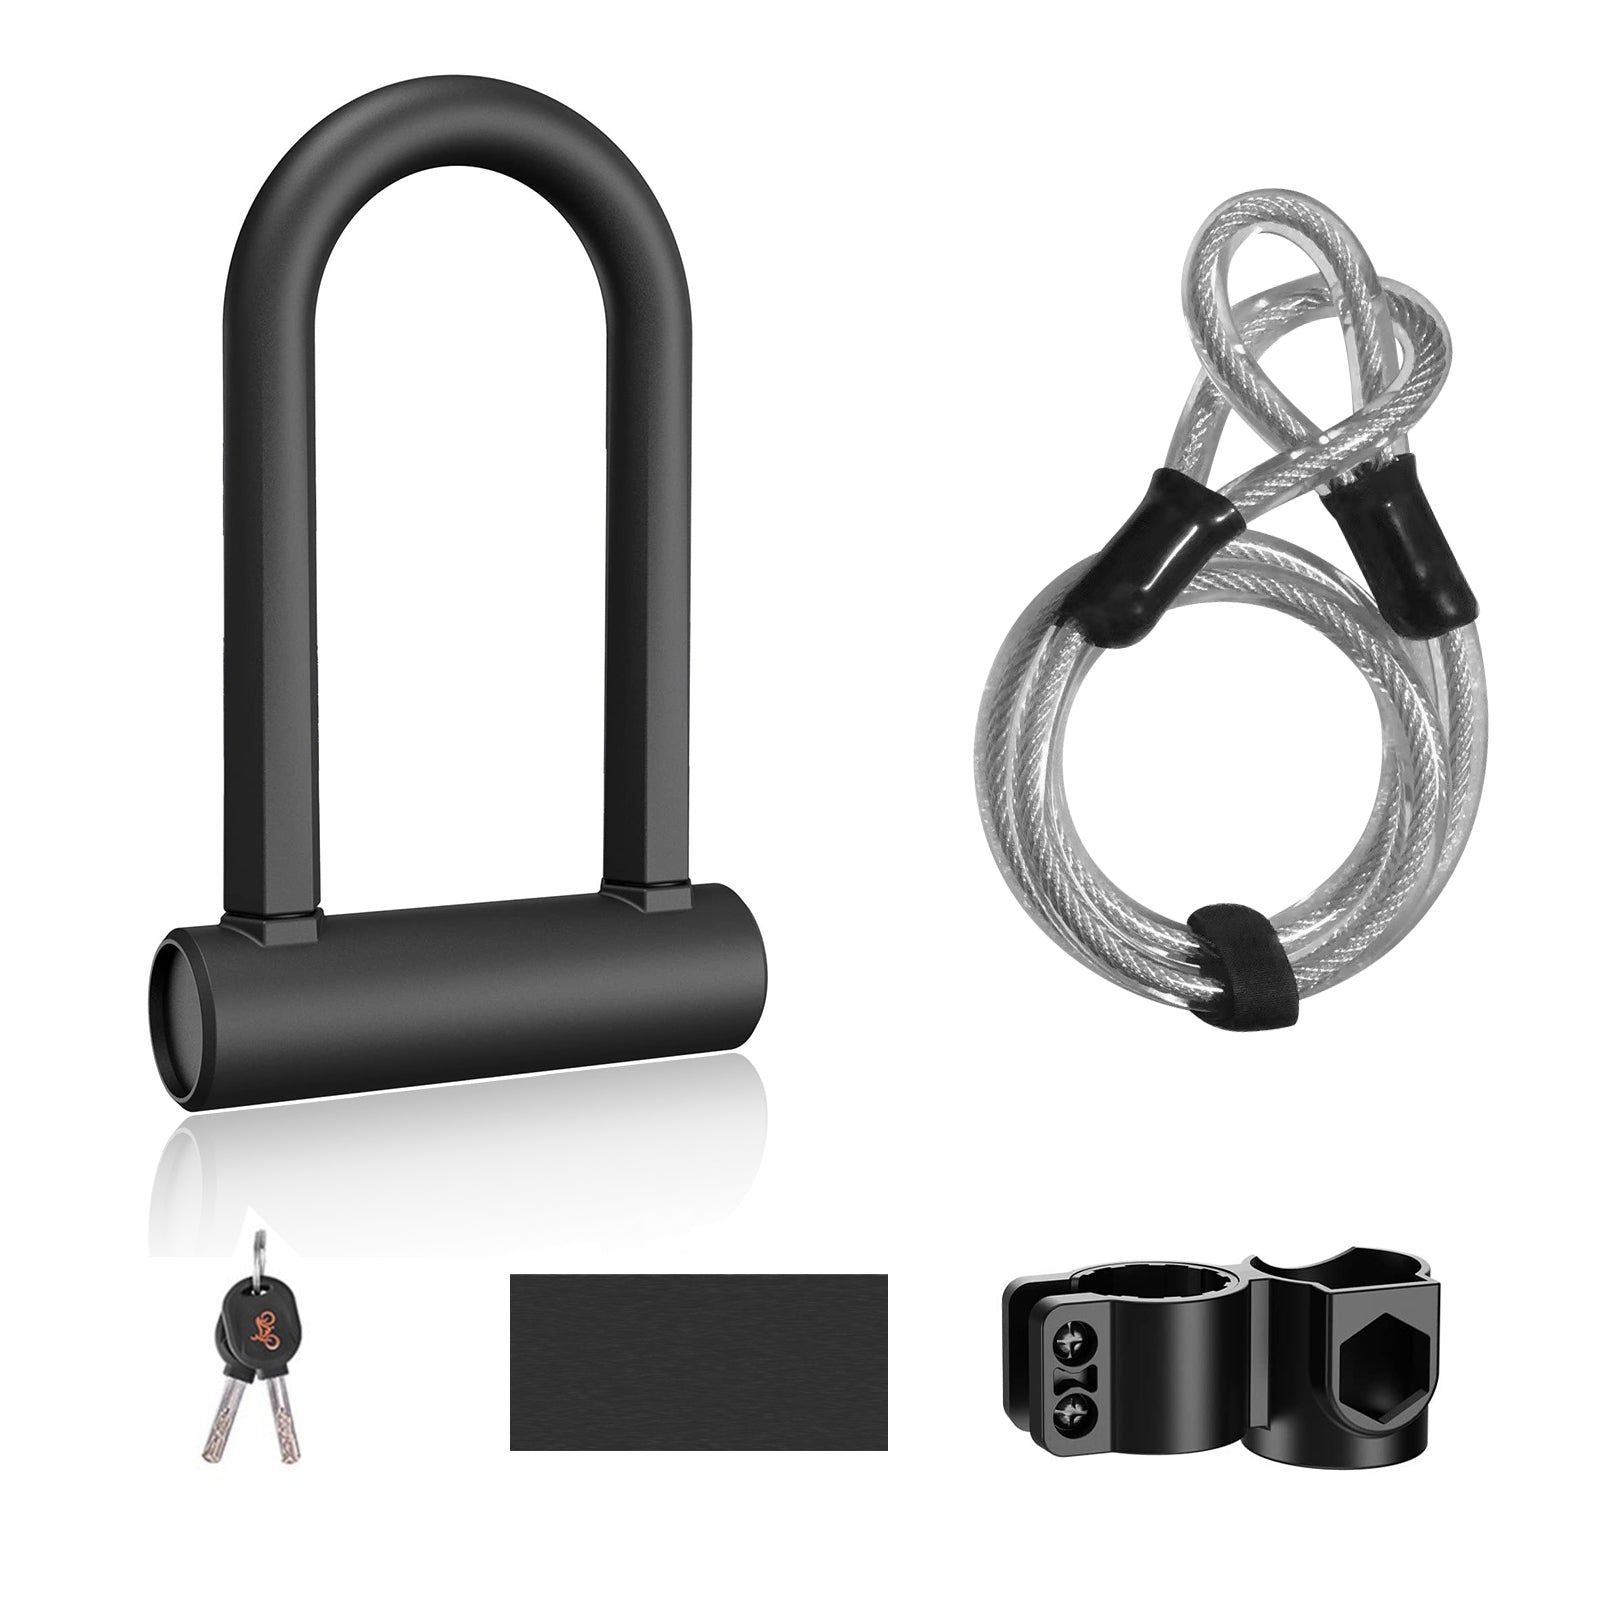 Scooter Lock, Security, Retractable Cable, Mechanical Lock, Easy